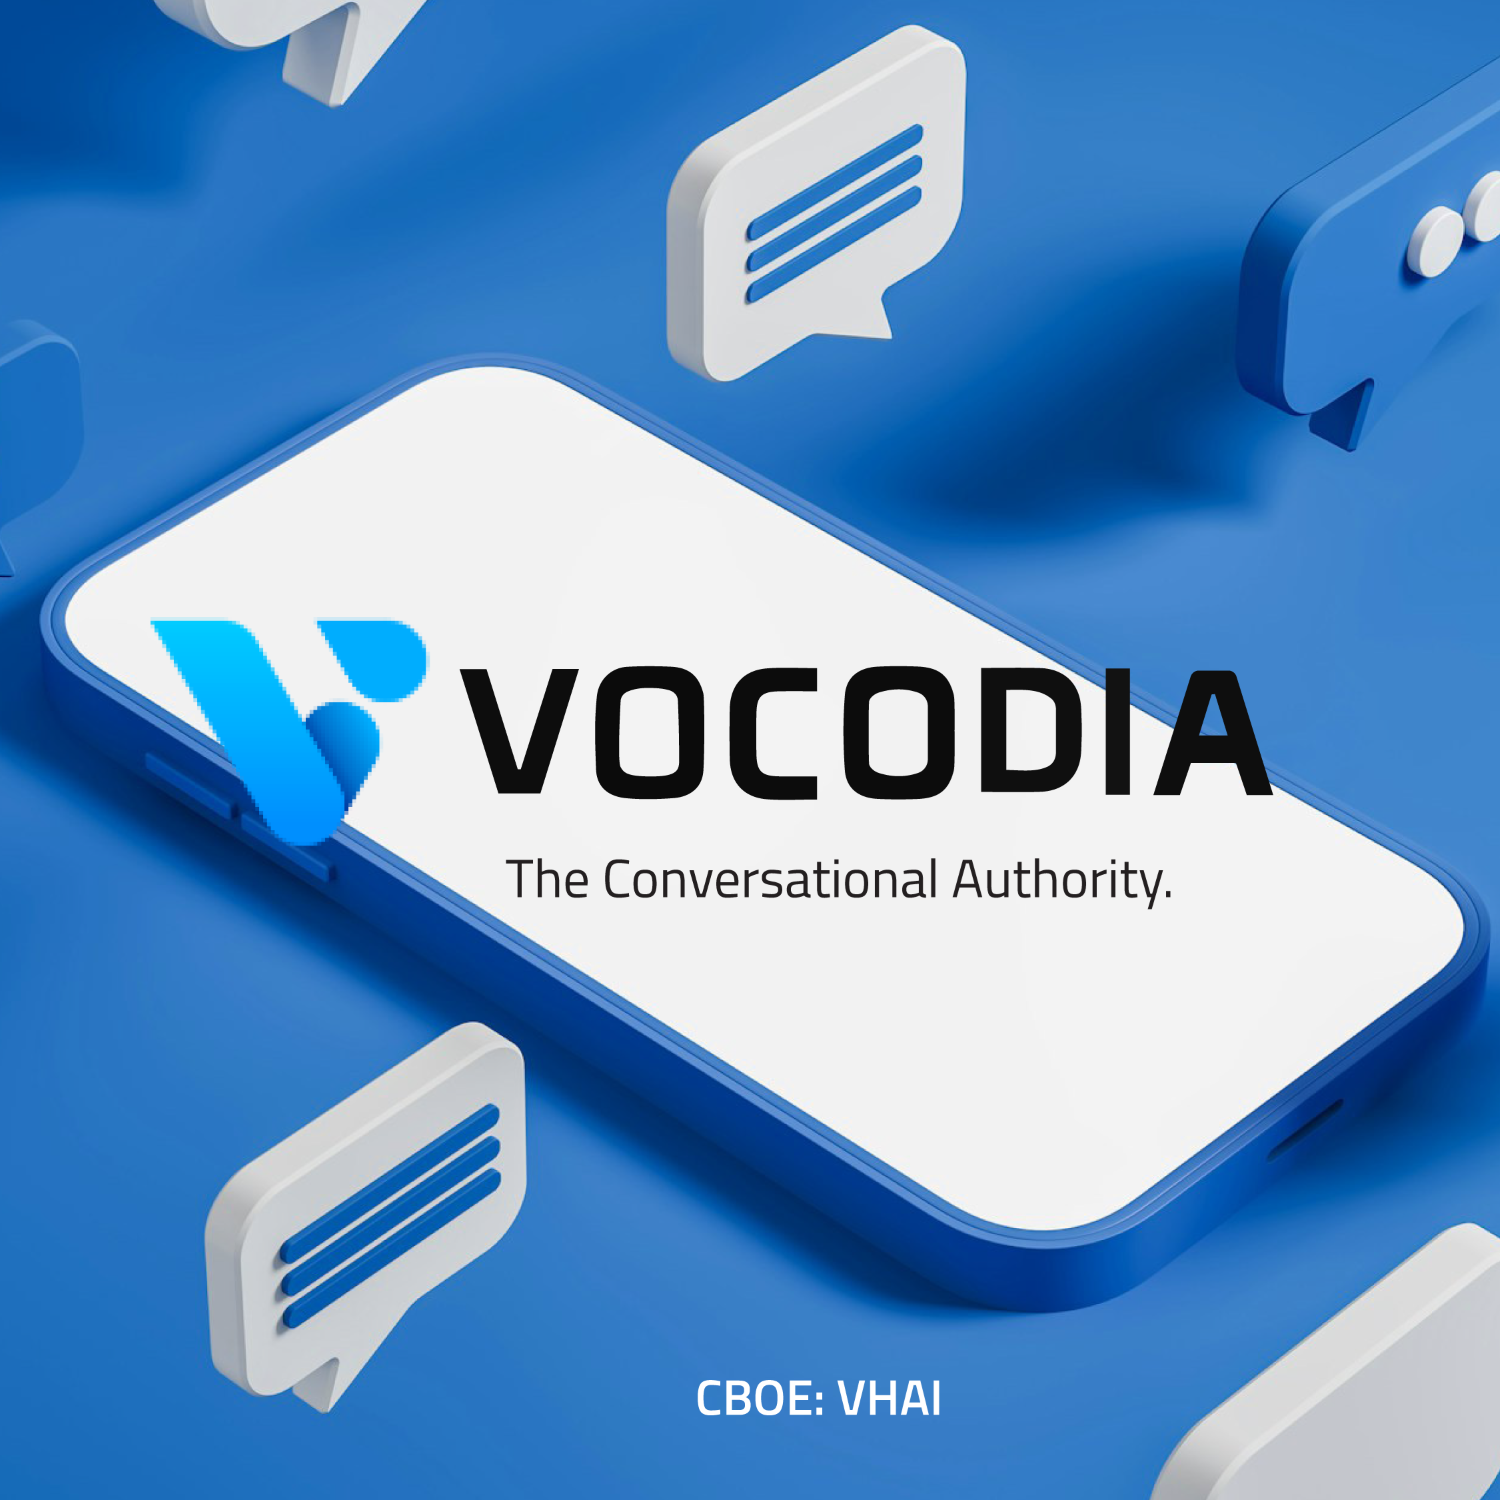 Vocodia's Conversational AI Technology Is The Newest Focus In The Booming Artificial Intelligence Sector  ($VHAI)